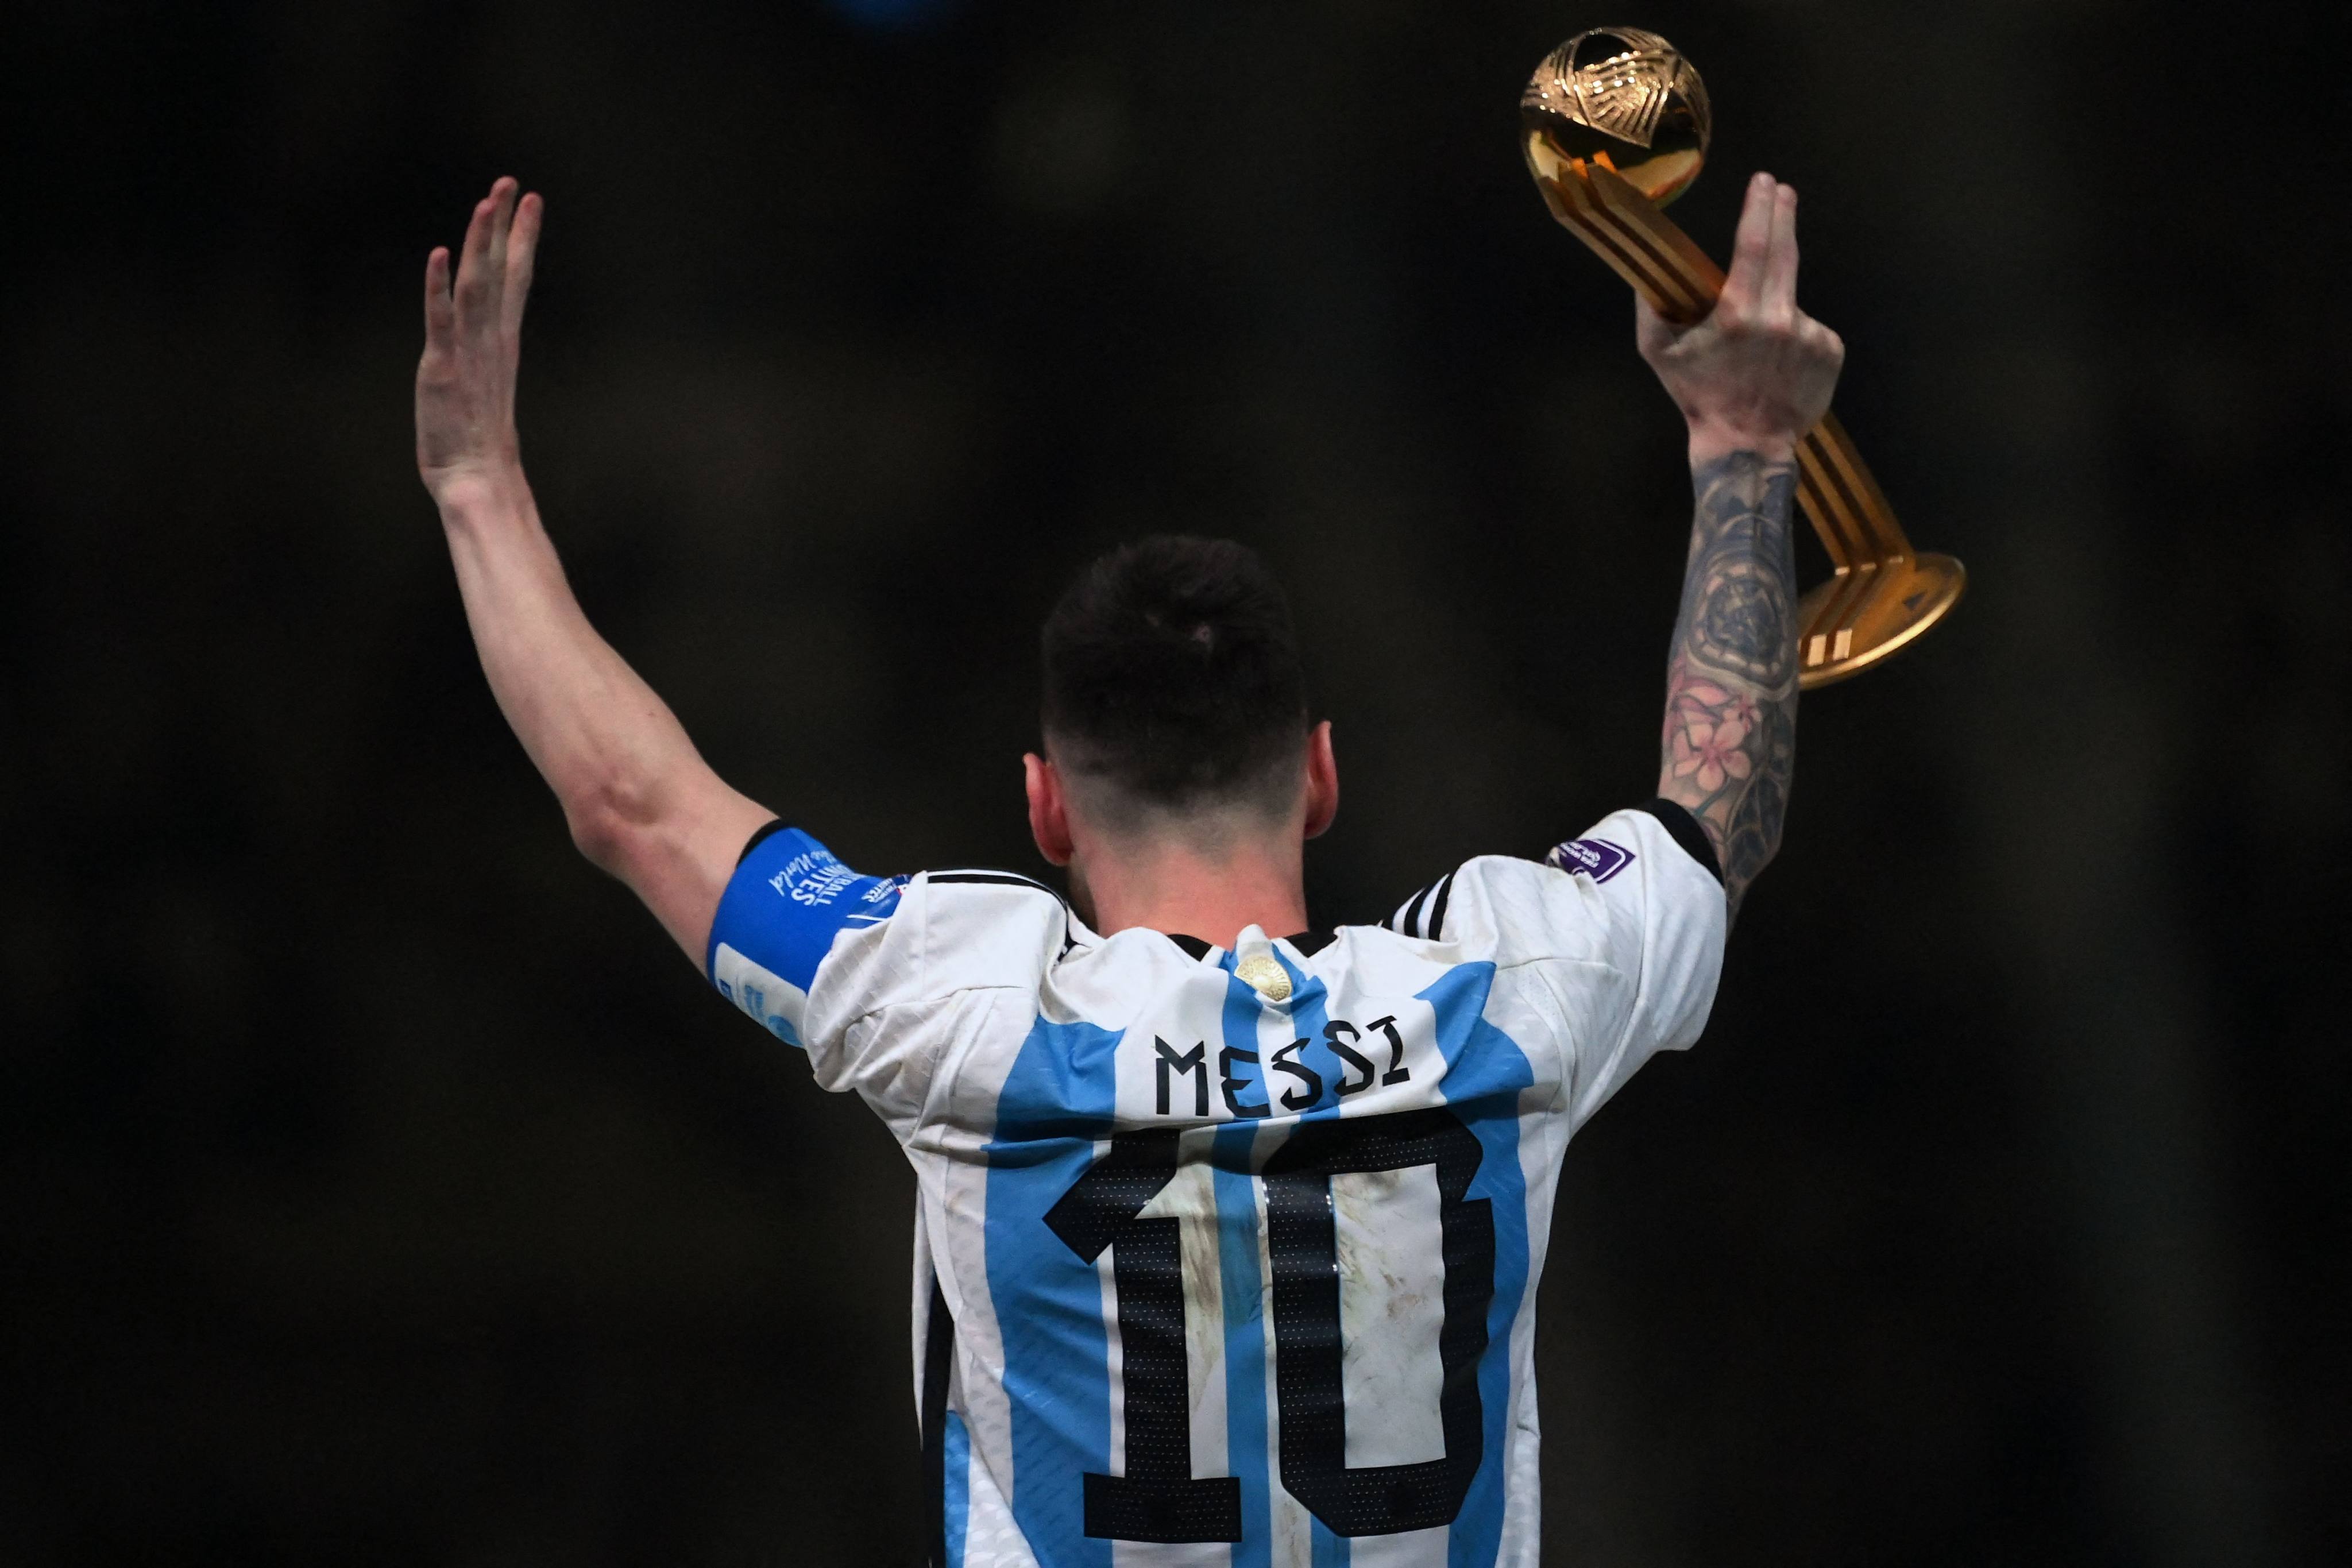 Argentina’s Lionel Messi with the Golden Ball award after Argentina’s victory over France in the World Cup final in Qatar on Sunday. Photo: AFP